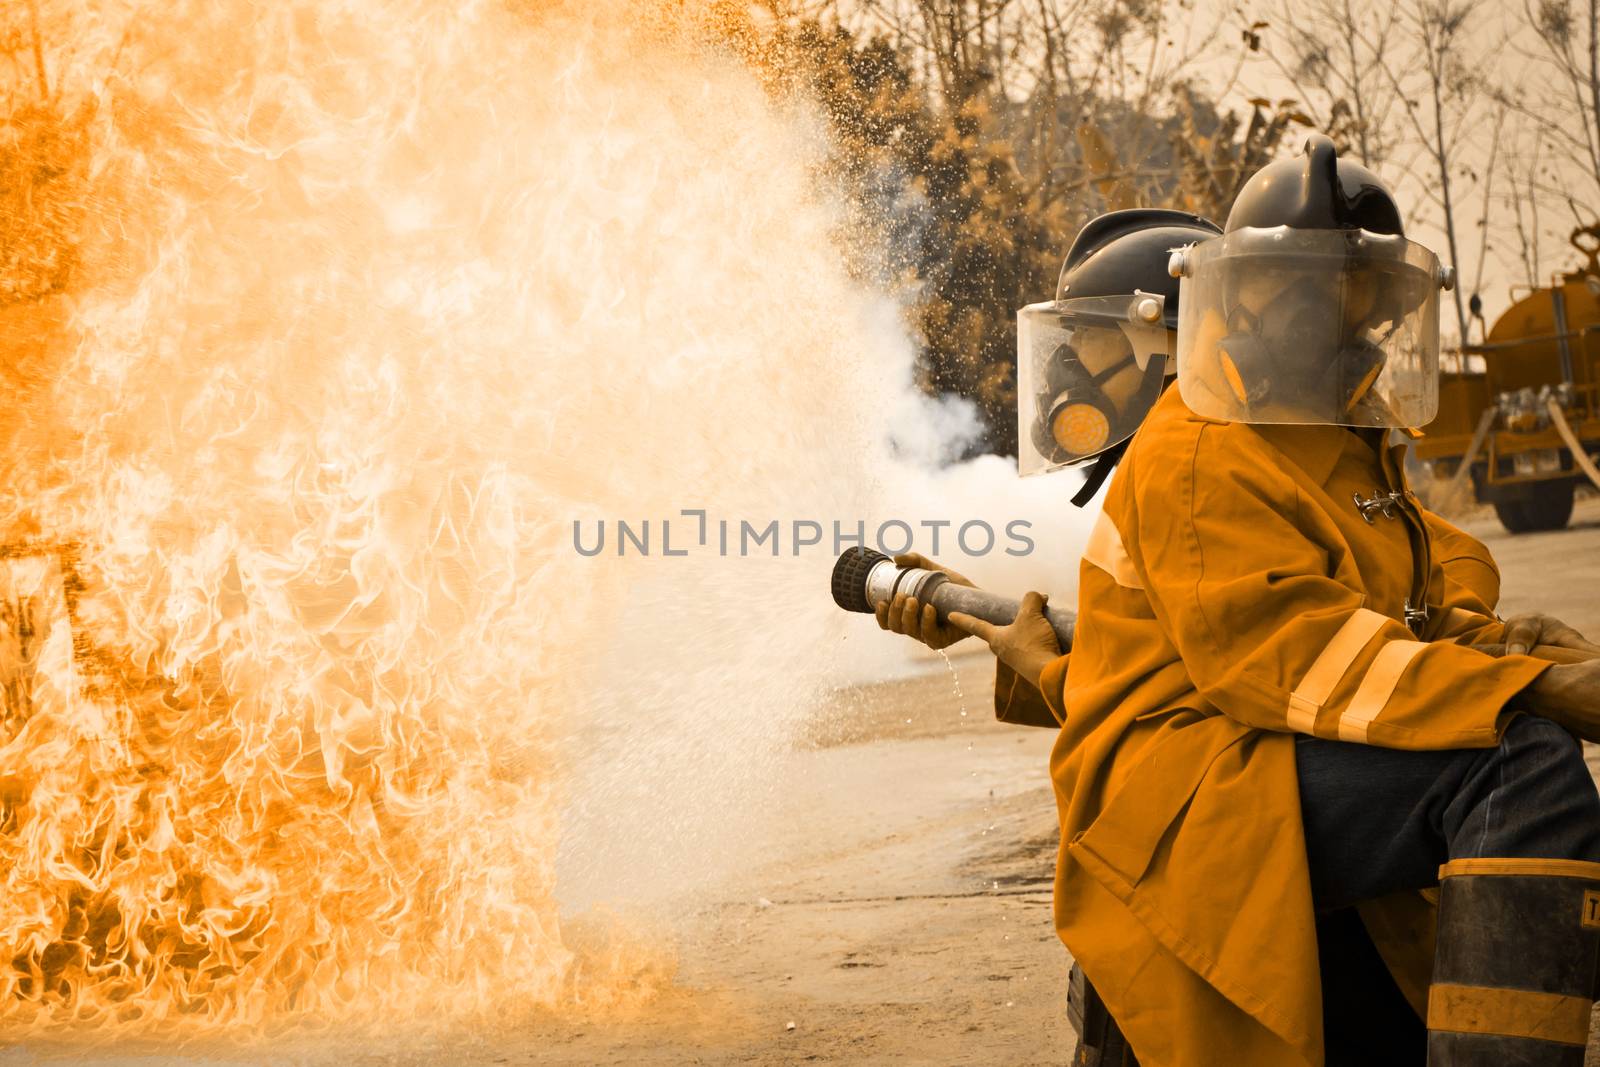 Firemen in action fighting fire during training by Thanamat